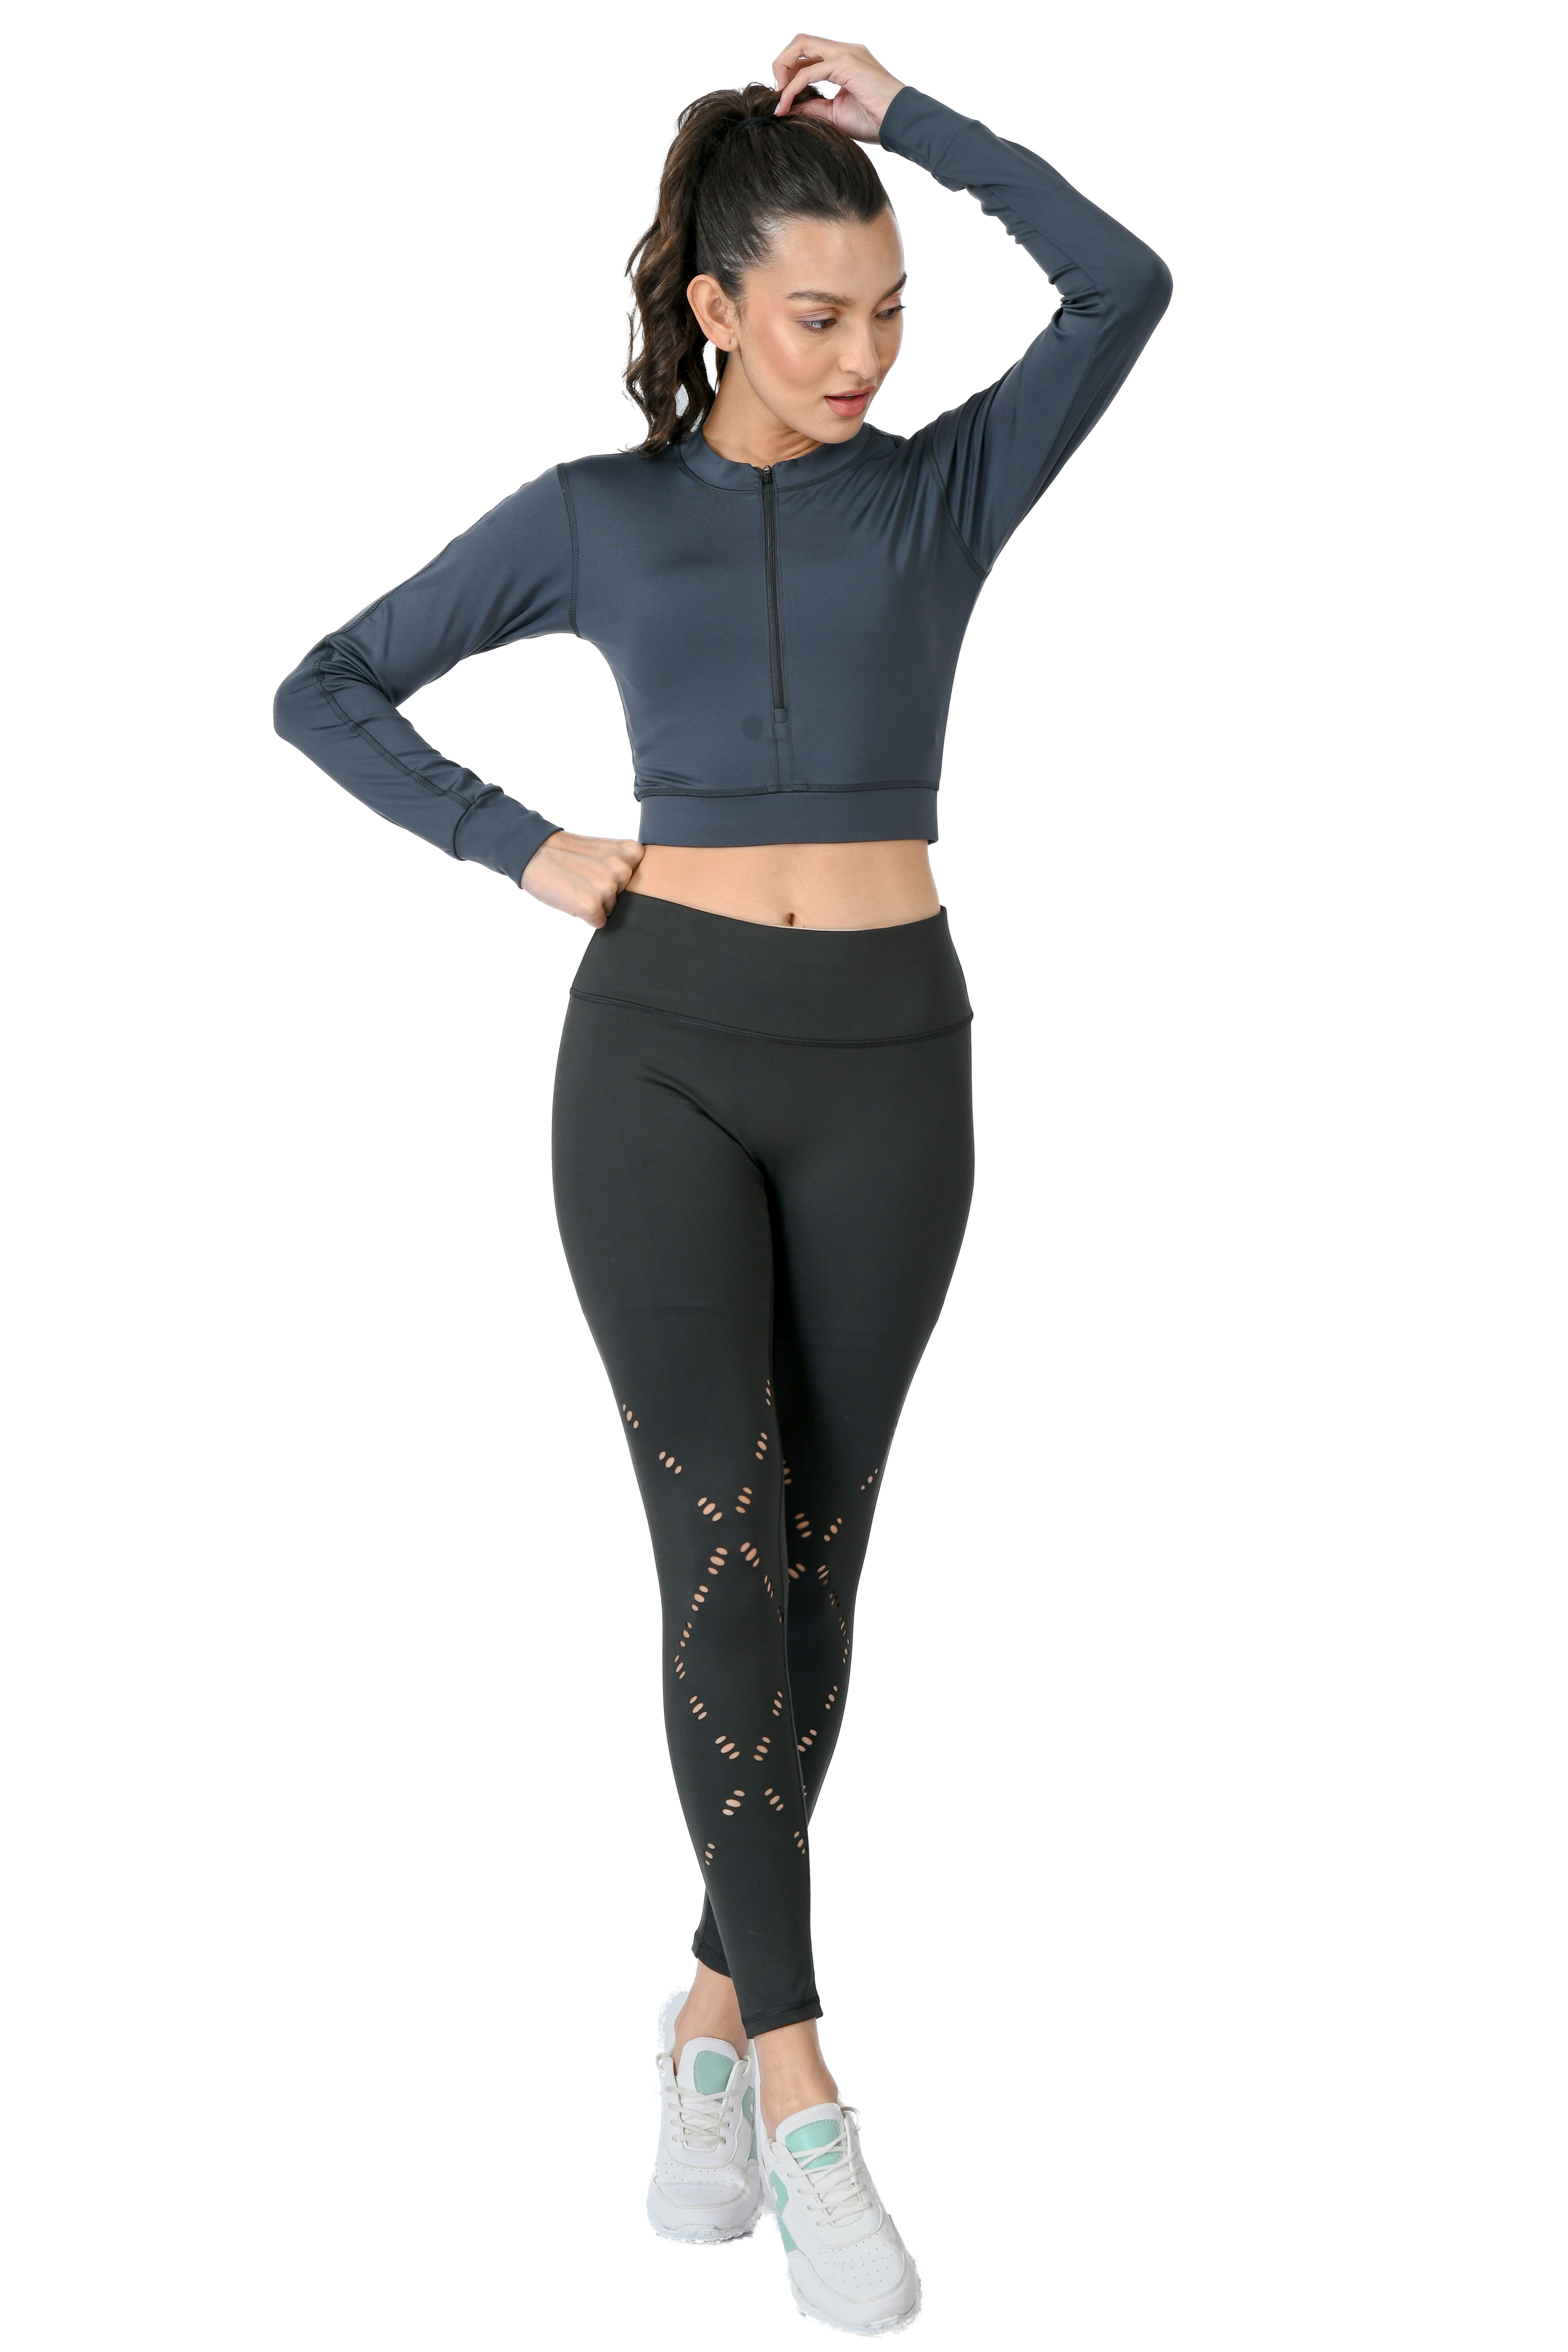 Green Crop Top and Leggings Gym Co Ord Set | Latest Gym Co Ord Sets |  Fitness wear women, Co ord, Textured leggings